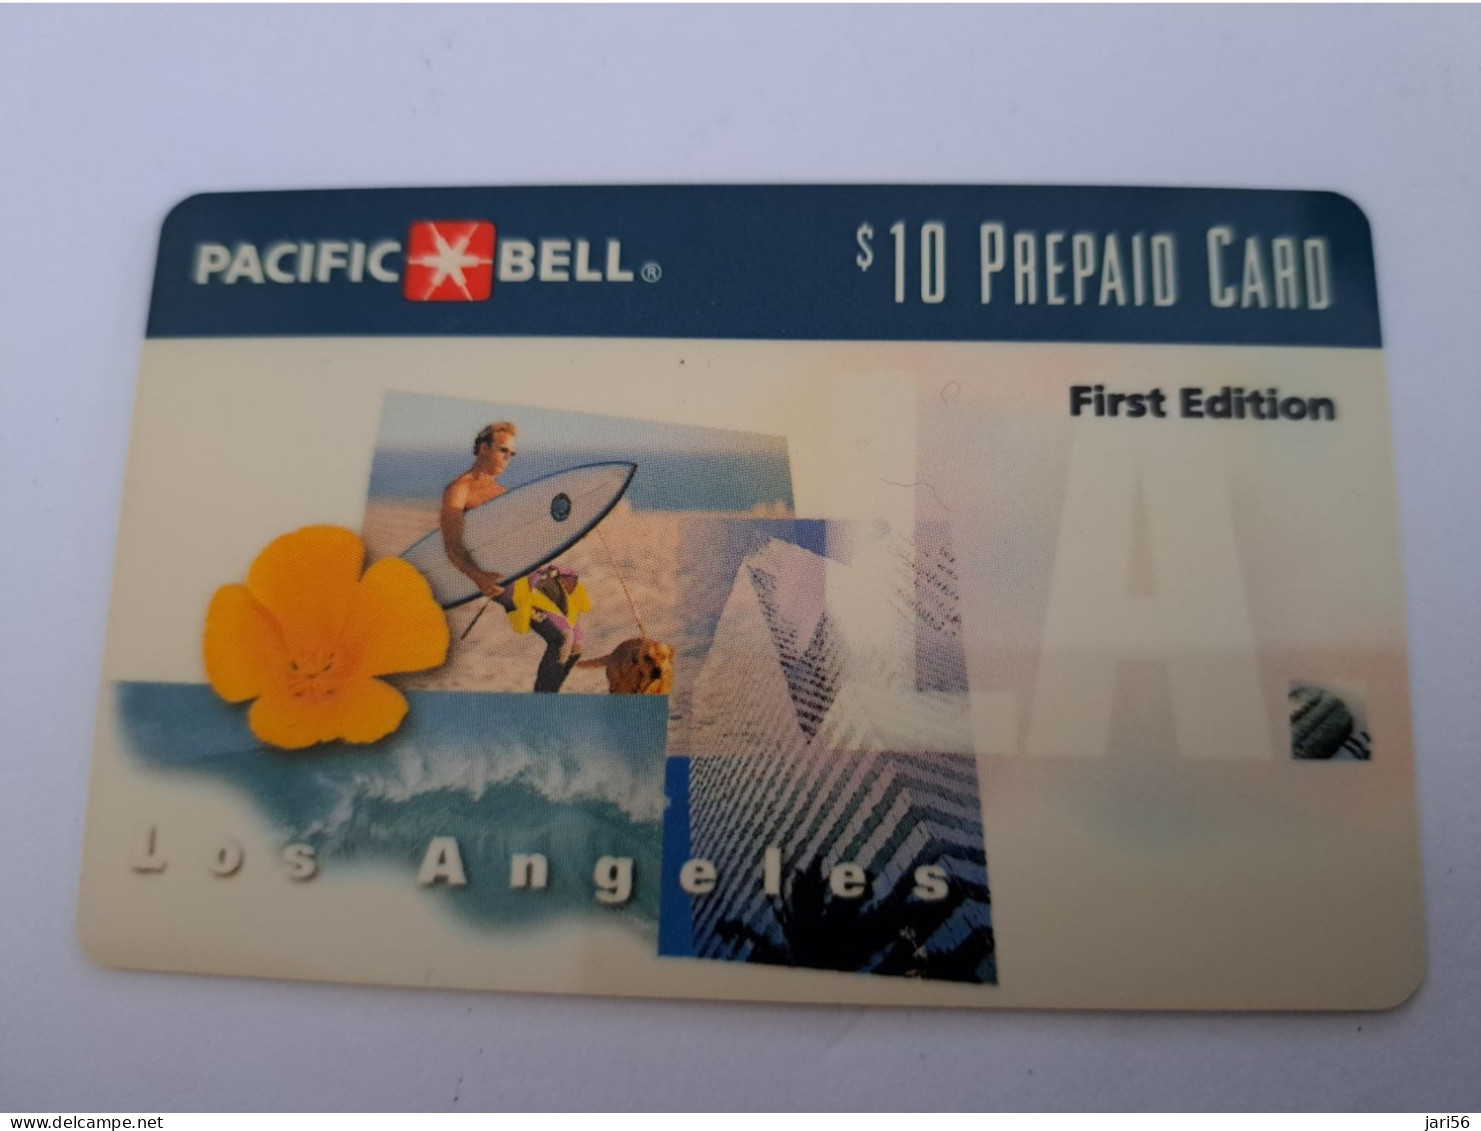 UNITED STATES USA AMERIKA / $10,- PACIFIC BELL / LOS ANGELES/ FIRST EDITION / OLDER CARD  / USED  **14881** - Amerivox